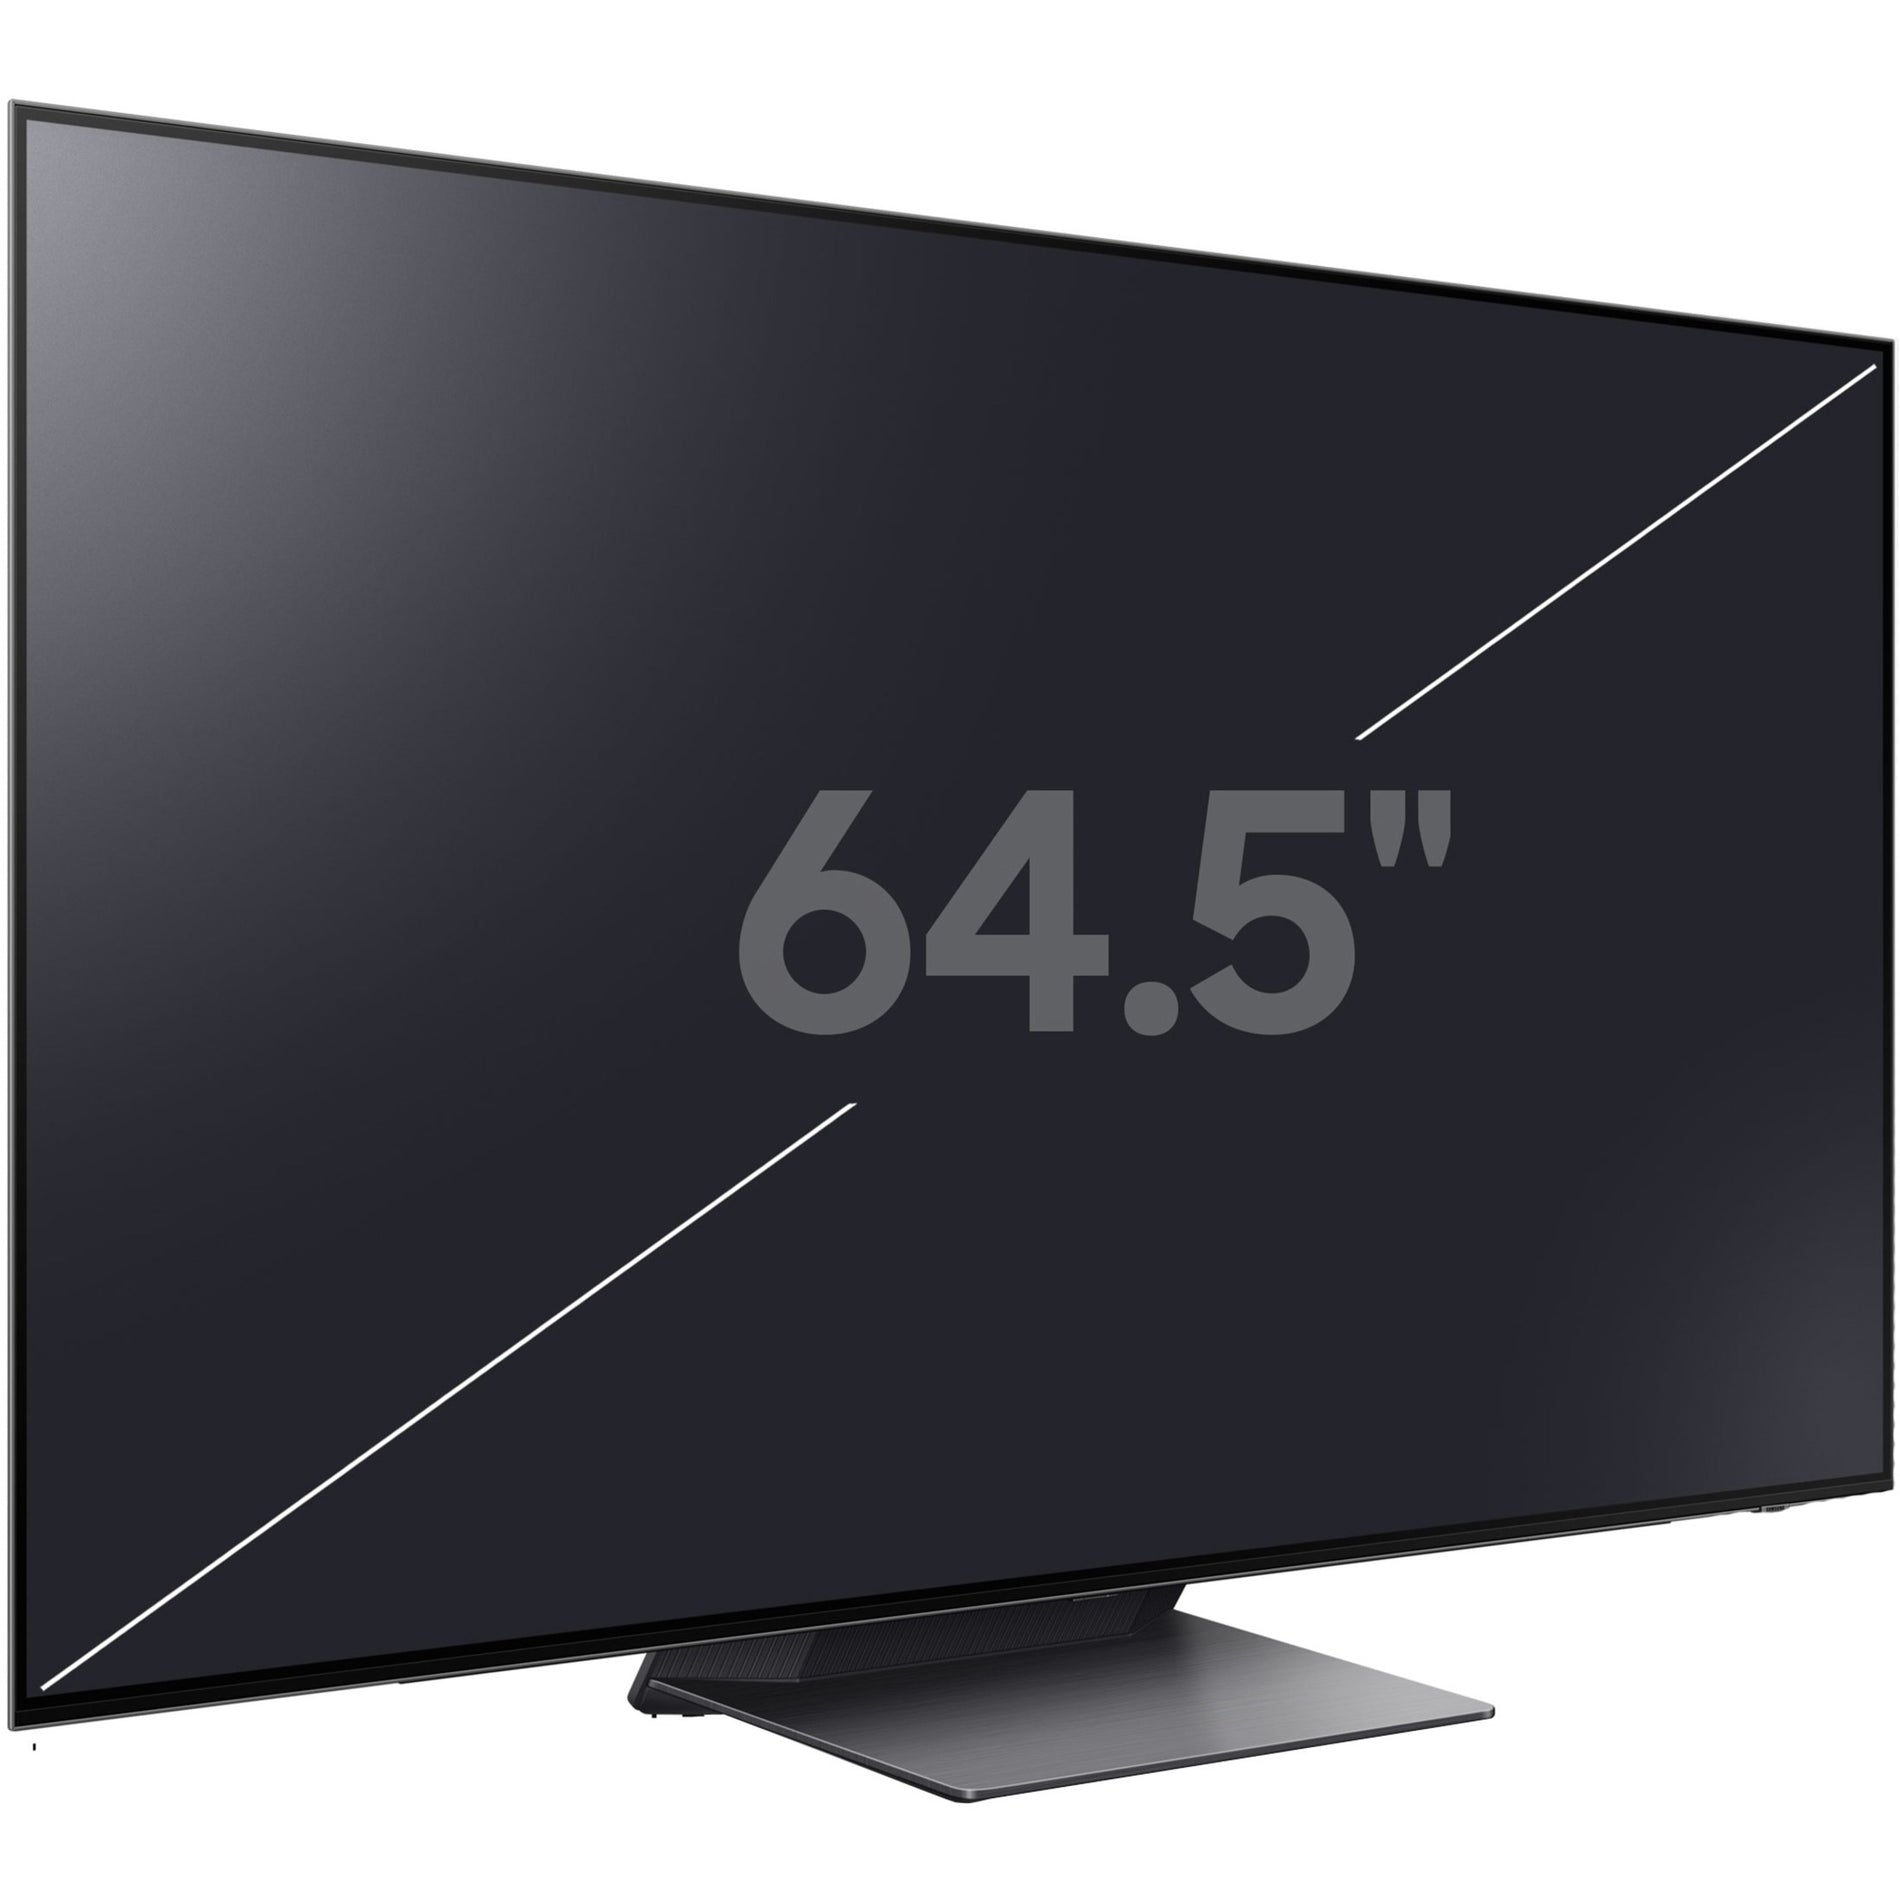 Samsung QN65S95BAFXZA 65" Class S95B OLED 4K Smart TV (2022), 120Hz, 4 HDMI Ports, Color Volume 100%, Neo Quantum Processor 4K with AI Upscaling, Object Tracking Sound, Ambient Mode +, SolarCell Remote